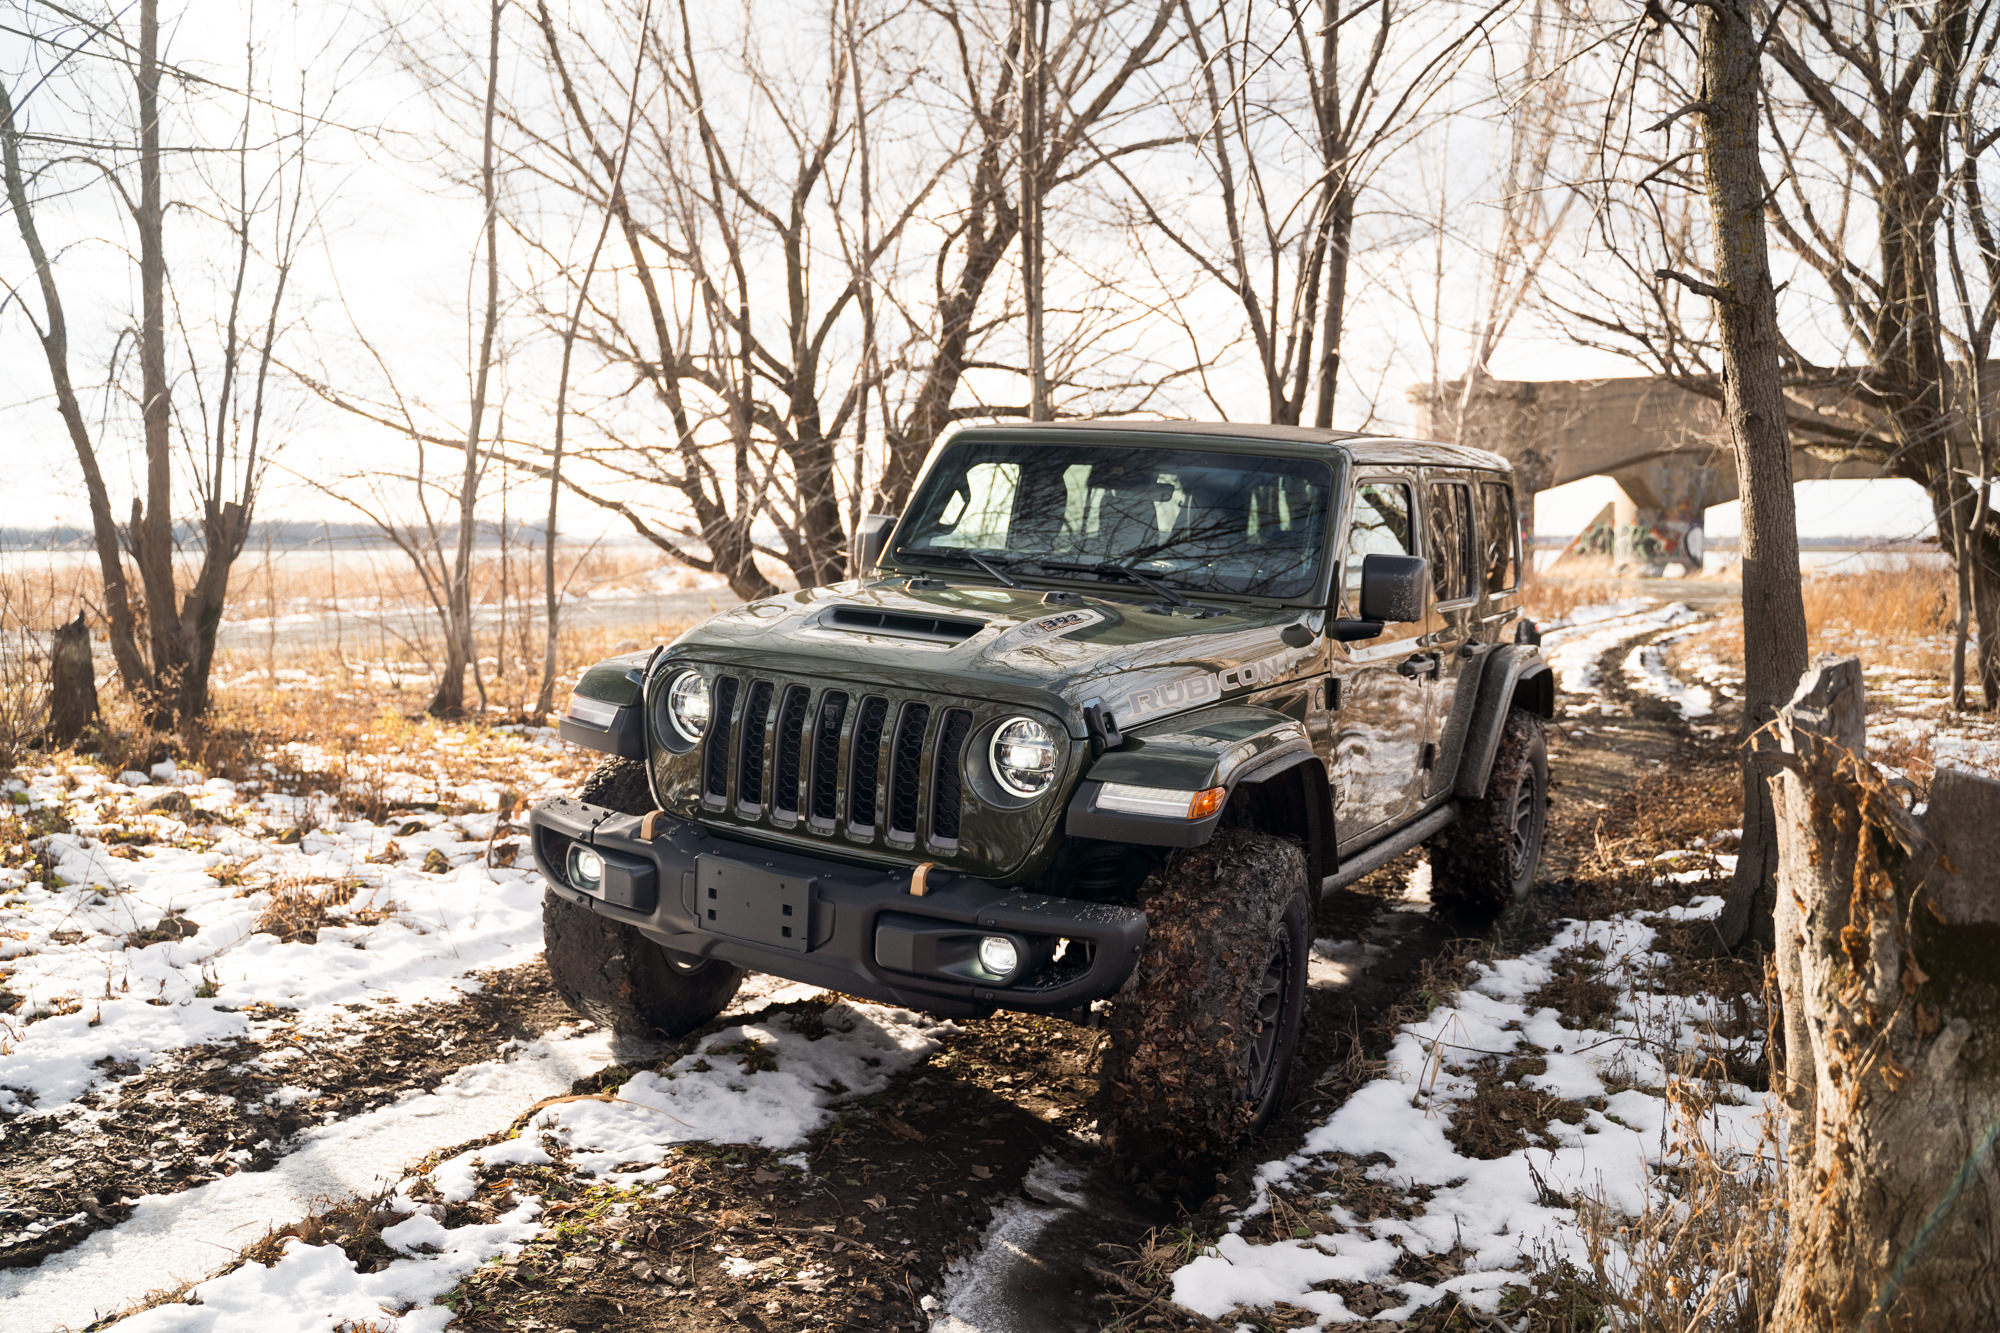 2022 Jeep Wrangler Rubicon 392: It's a Jeep thing - Spotted Cars